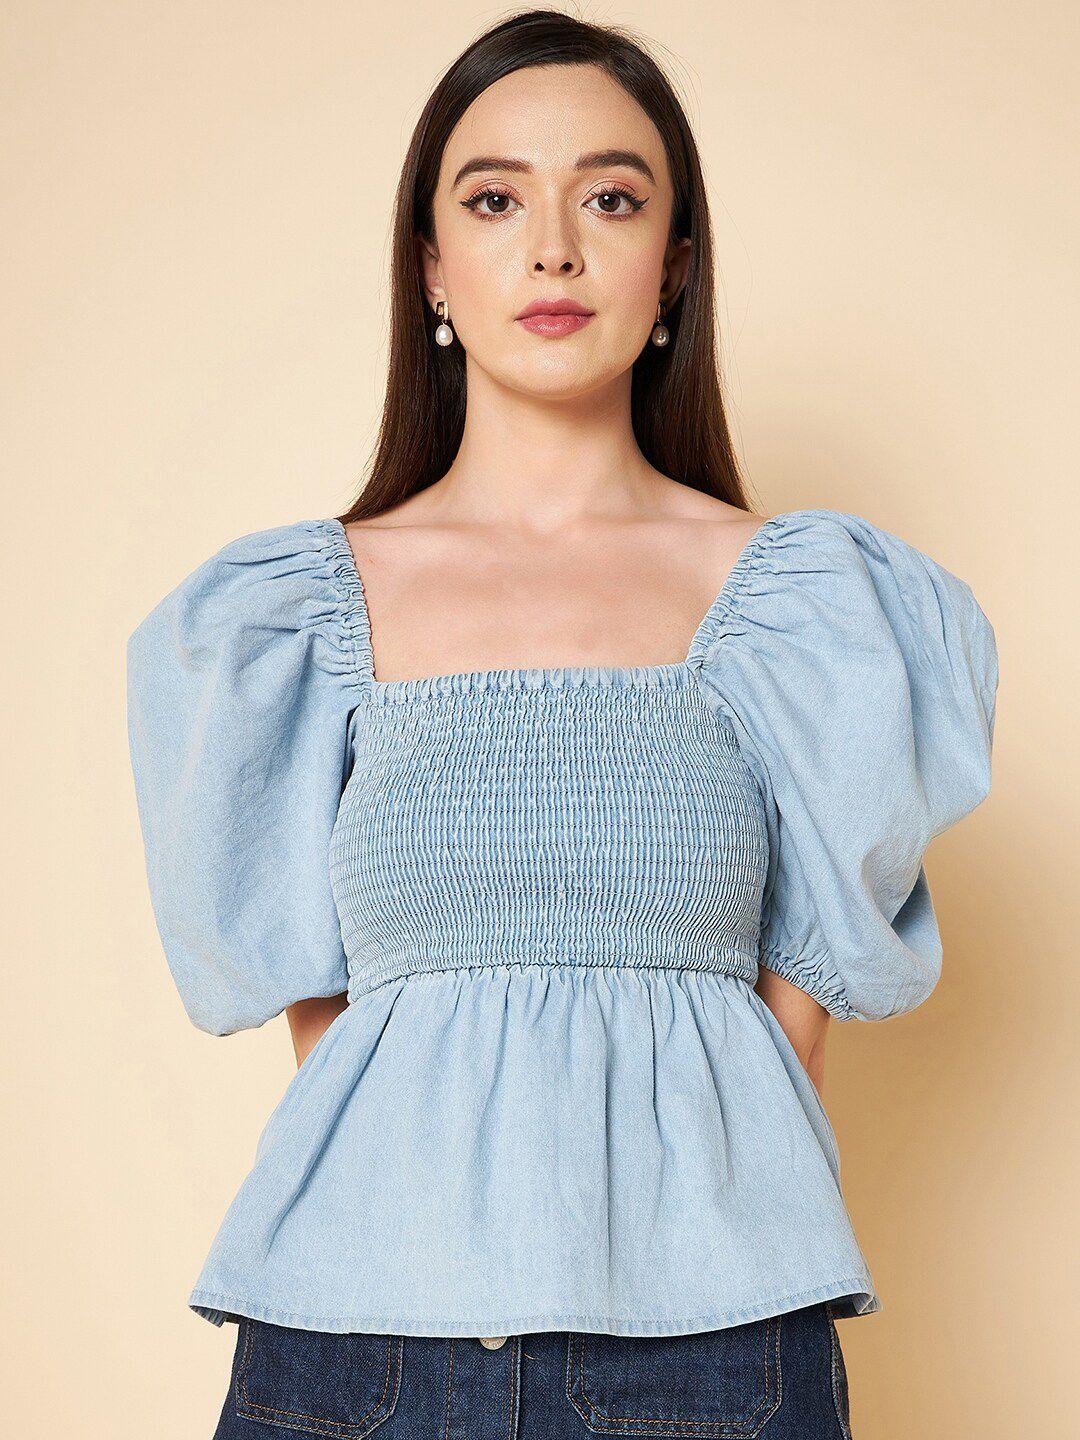 high-star-square-neck-puff-sleeves-smocked-pure-cotton-peplum-top